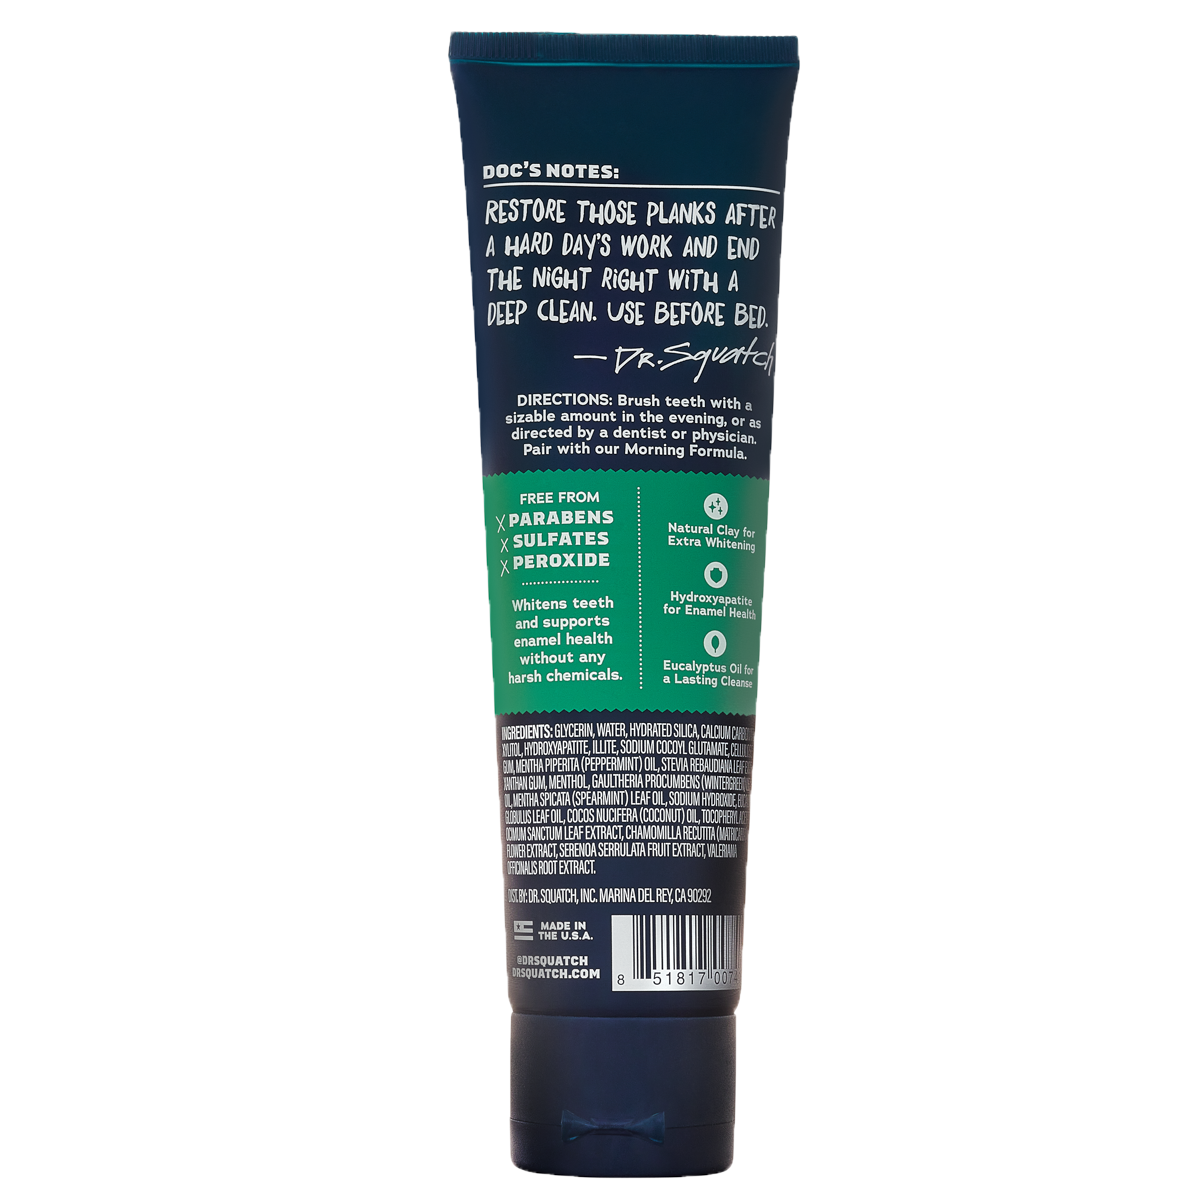 Soothing Spearmint Toothpaste